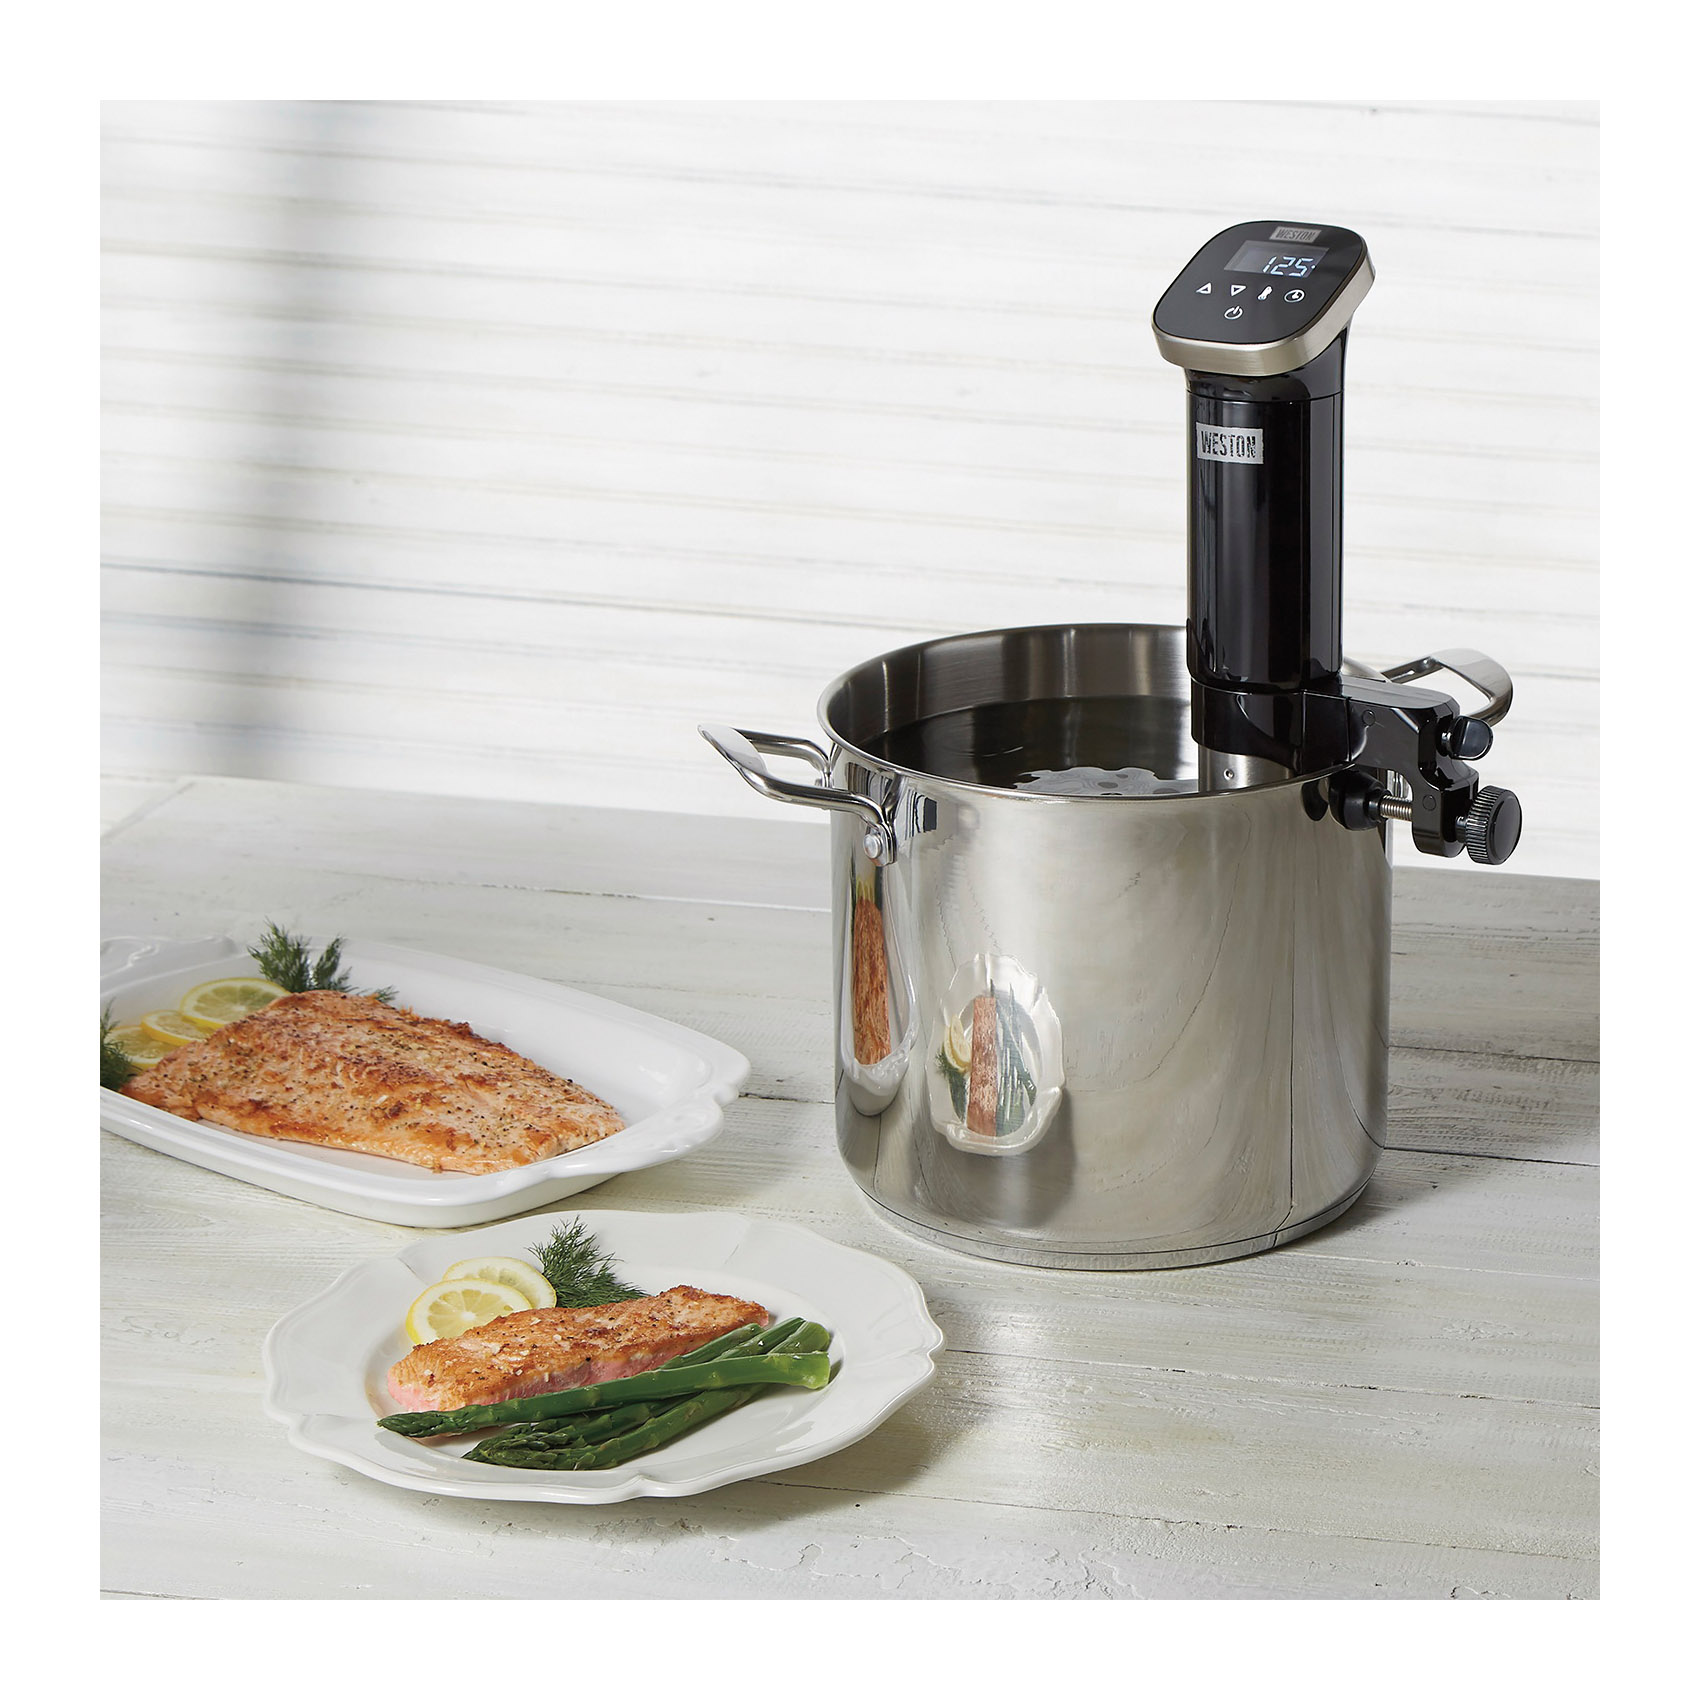 Weston 20 qt. Black Stainless Steel Programmable Sous Vide Immersion Cooker - 2